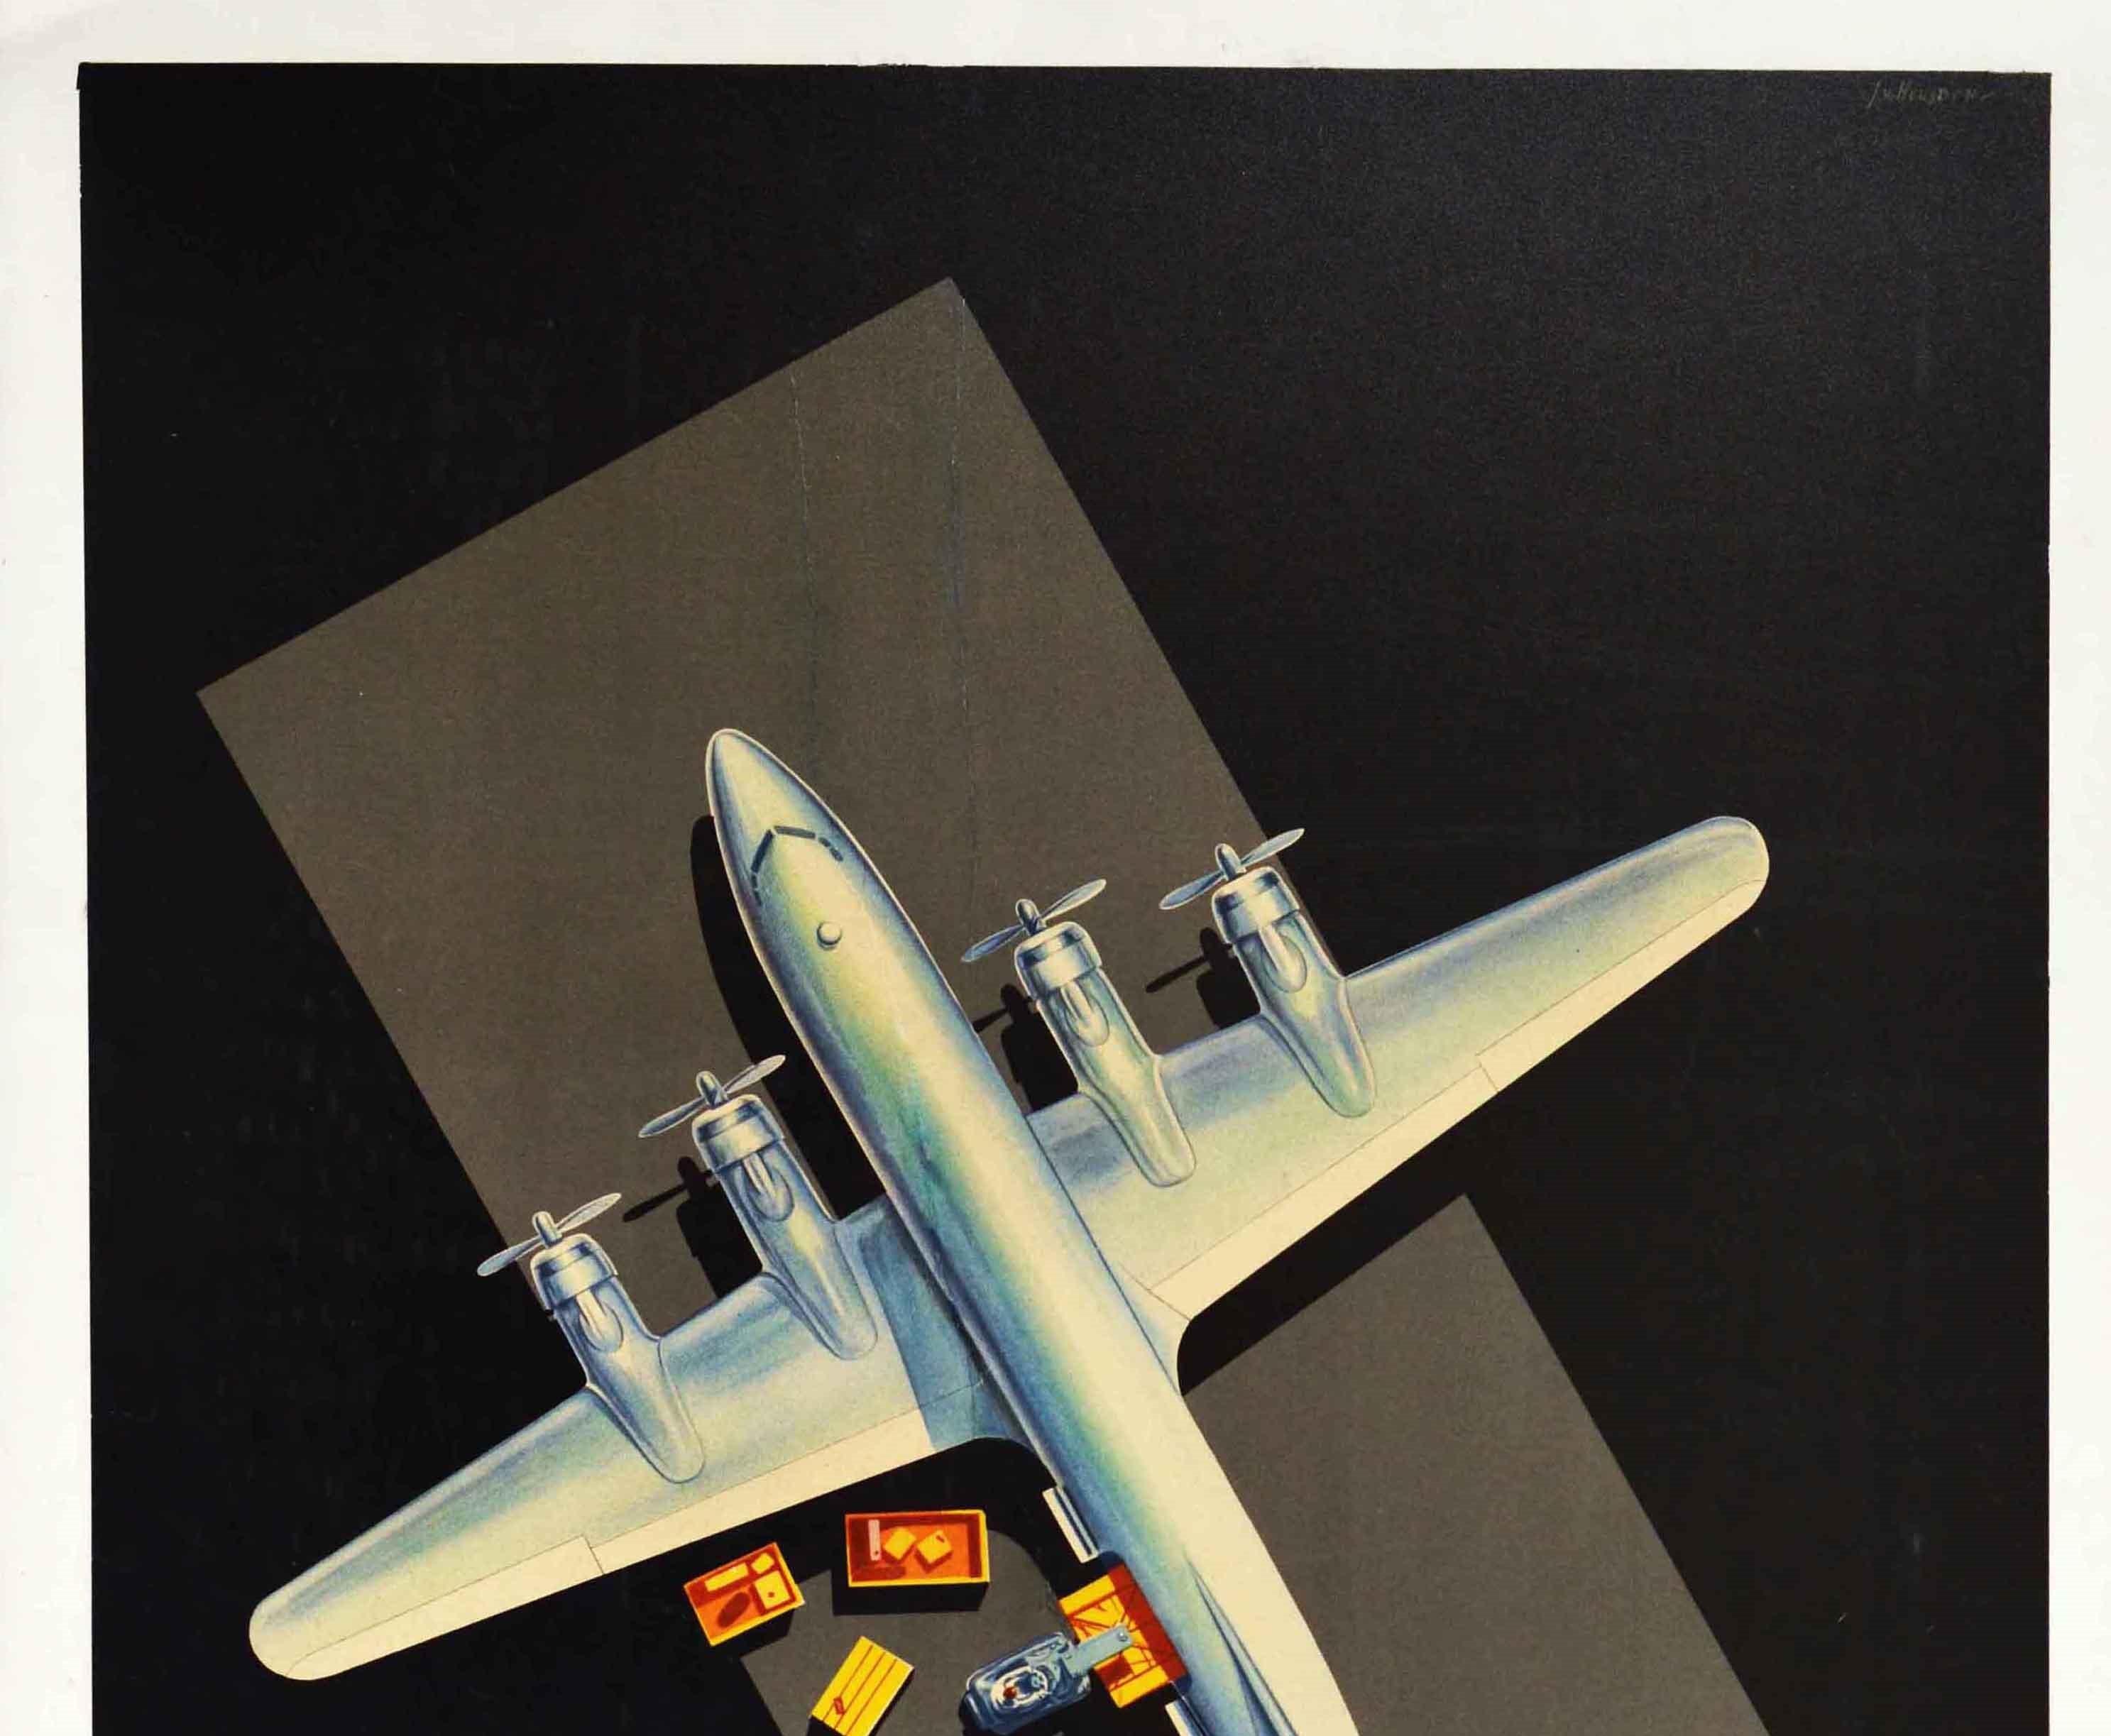 Original vintage advertising poster - Your Freight by KLM Royal Dutch Airlines - featuring a great mid-century design of a double propeller freight plane on a grey airstrip with airport staff loading boxes, crates and bags from red and green lorries